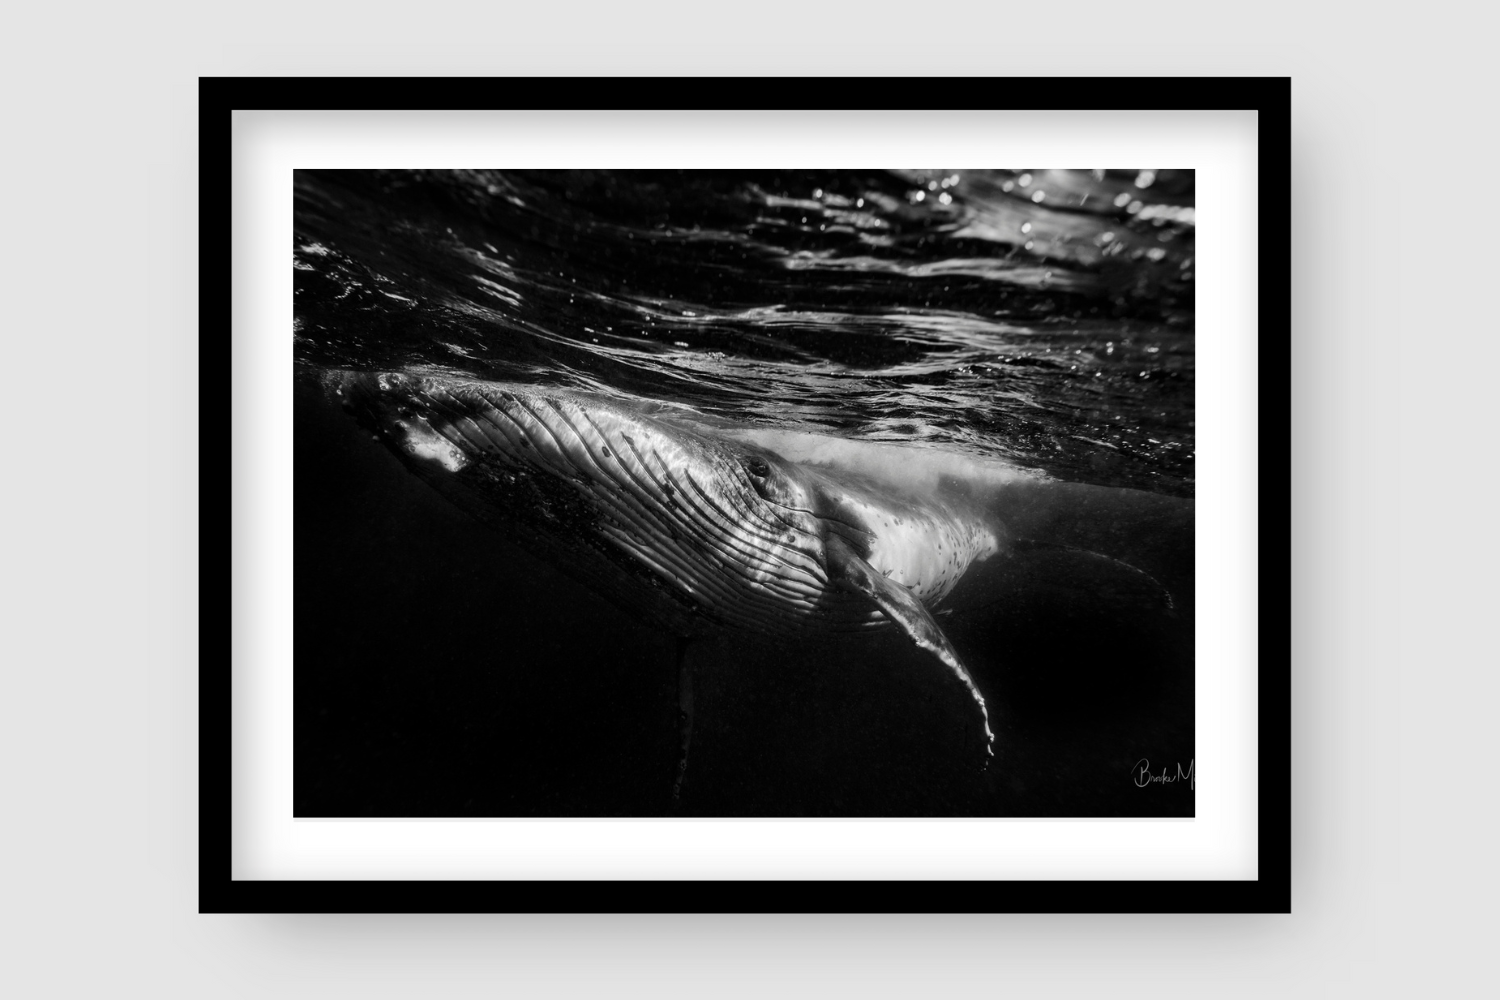 black and white image of large humpback whale breaking the surface of the water